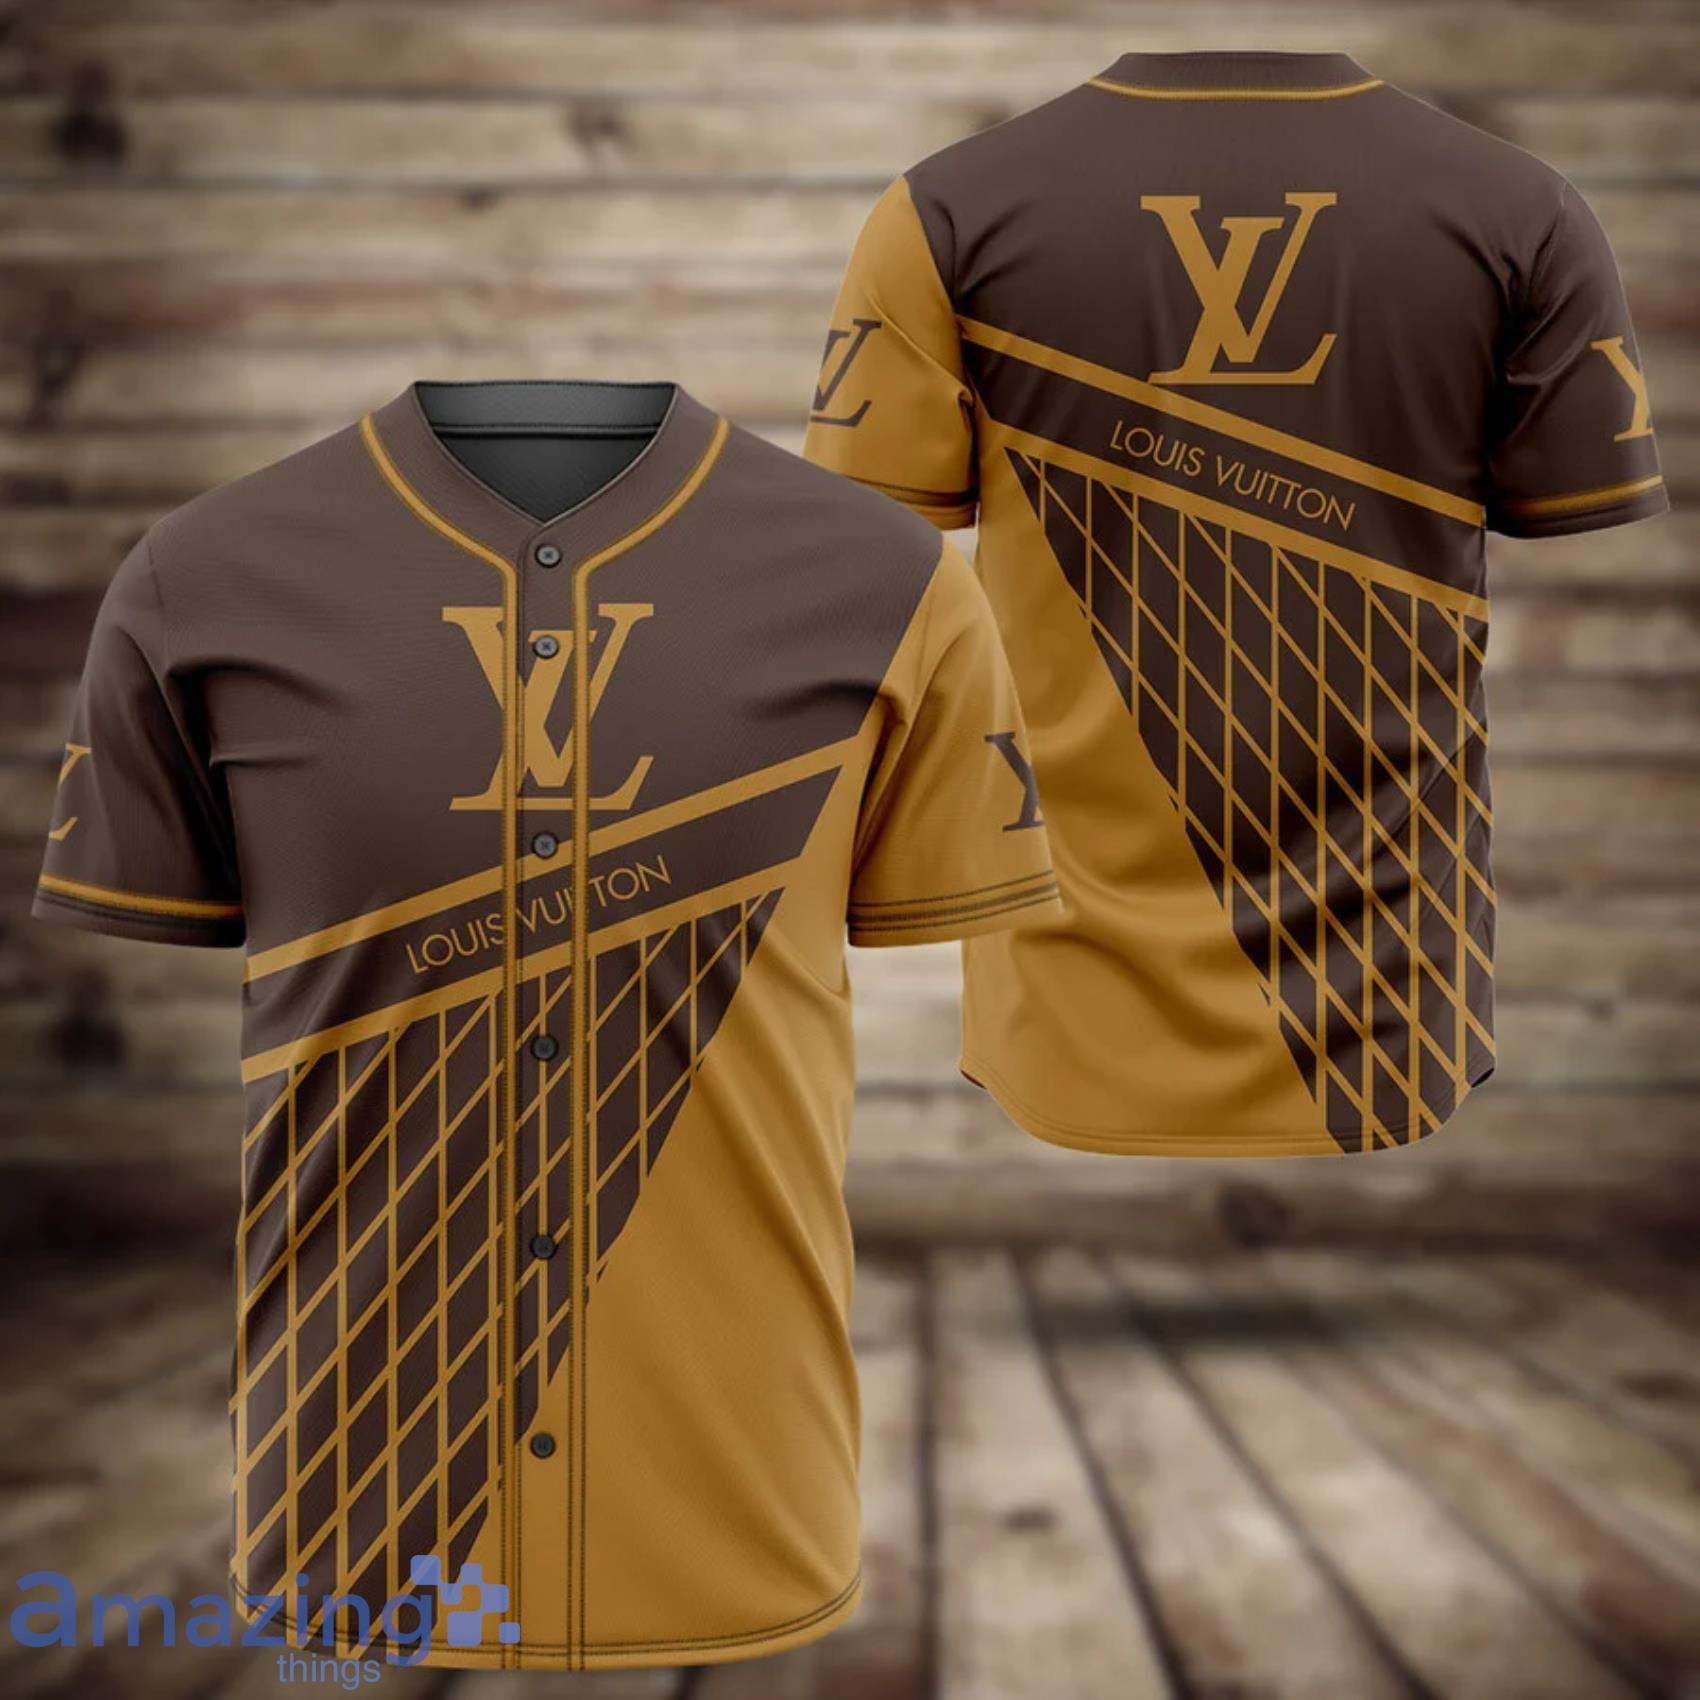 Louis Vuitton Baseball Jersey Clothes Sport Outfit For Men Women Style 5